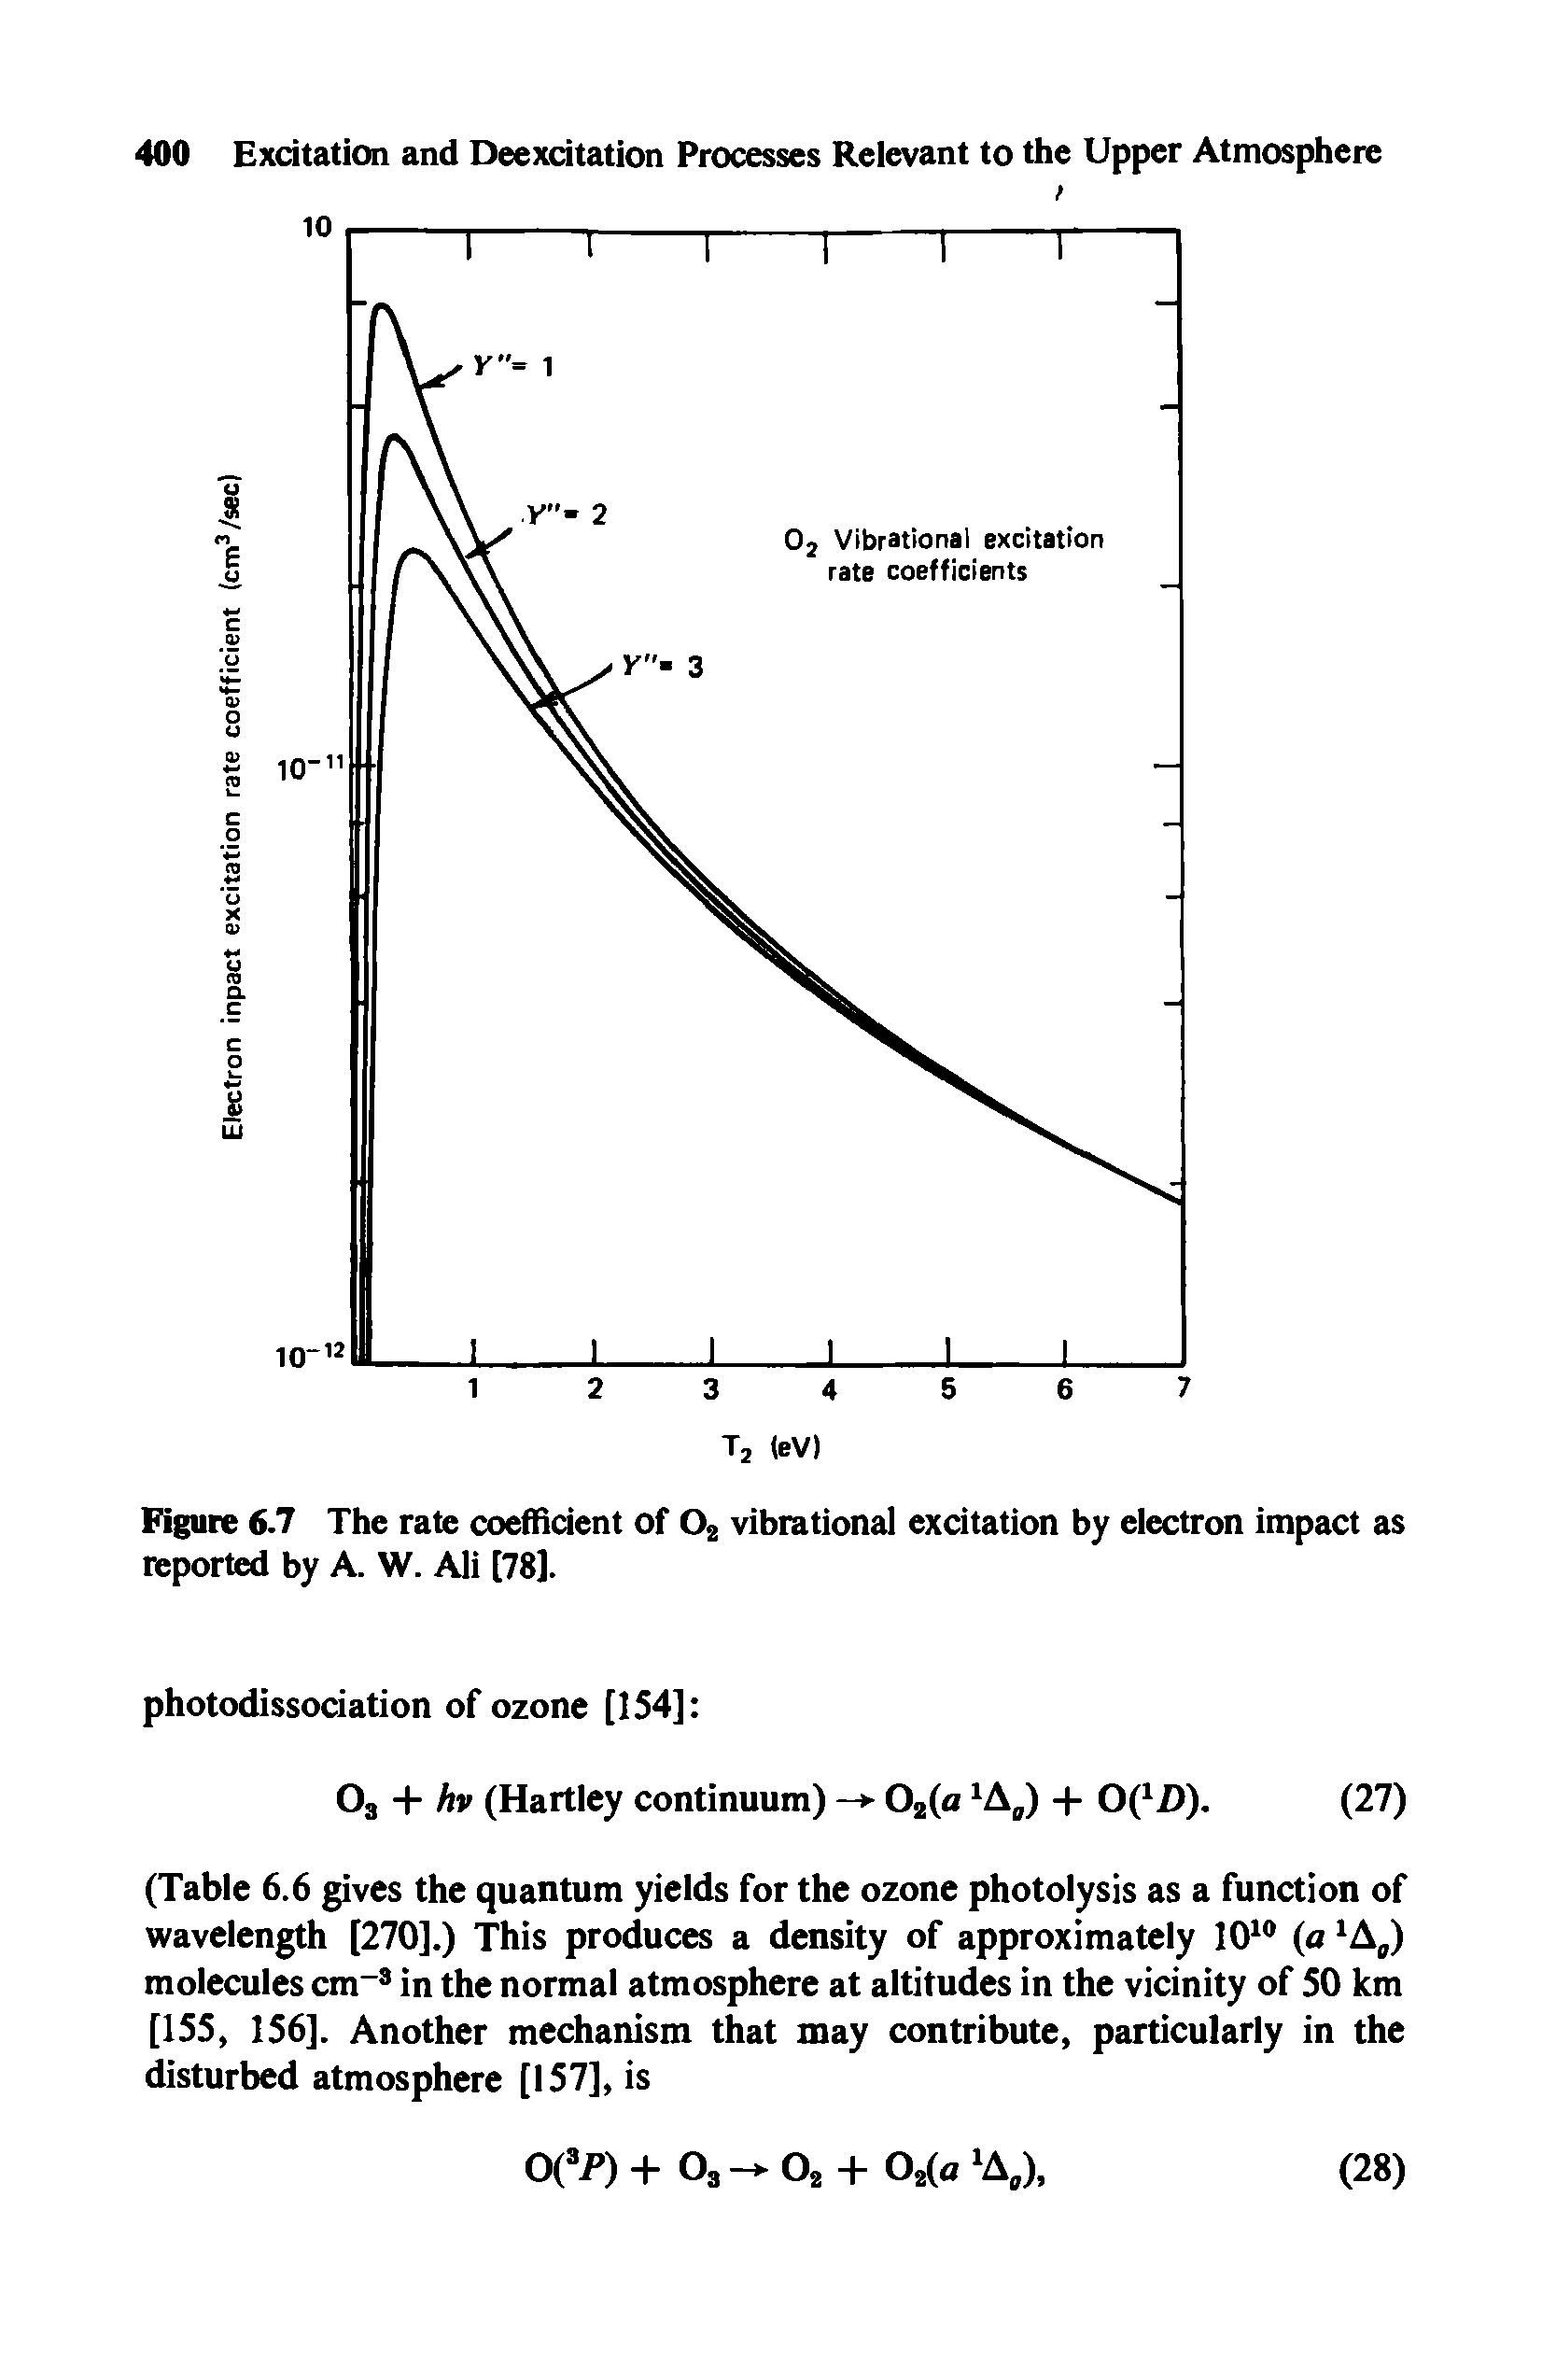 Figure 6.7 The rate coefficient of 02 vibrational excitation by electron impact as reported by A. W. Ali [78].